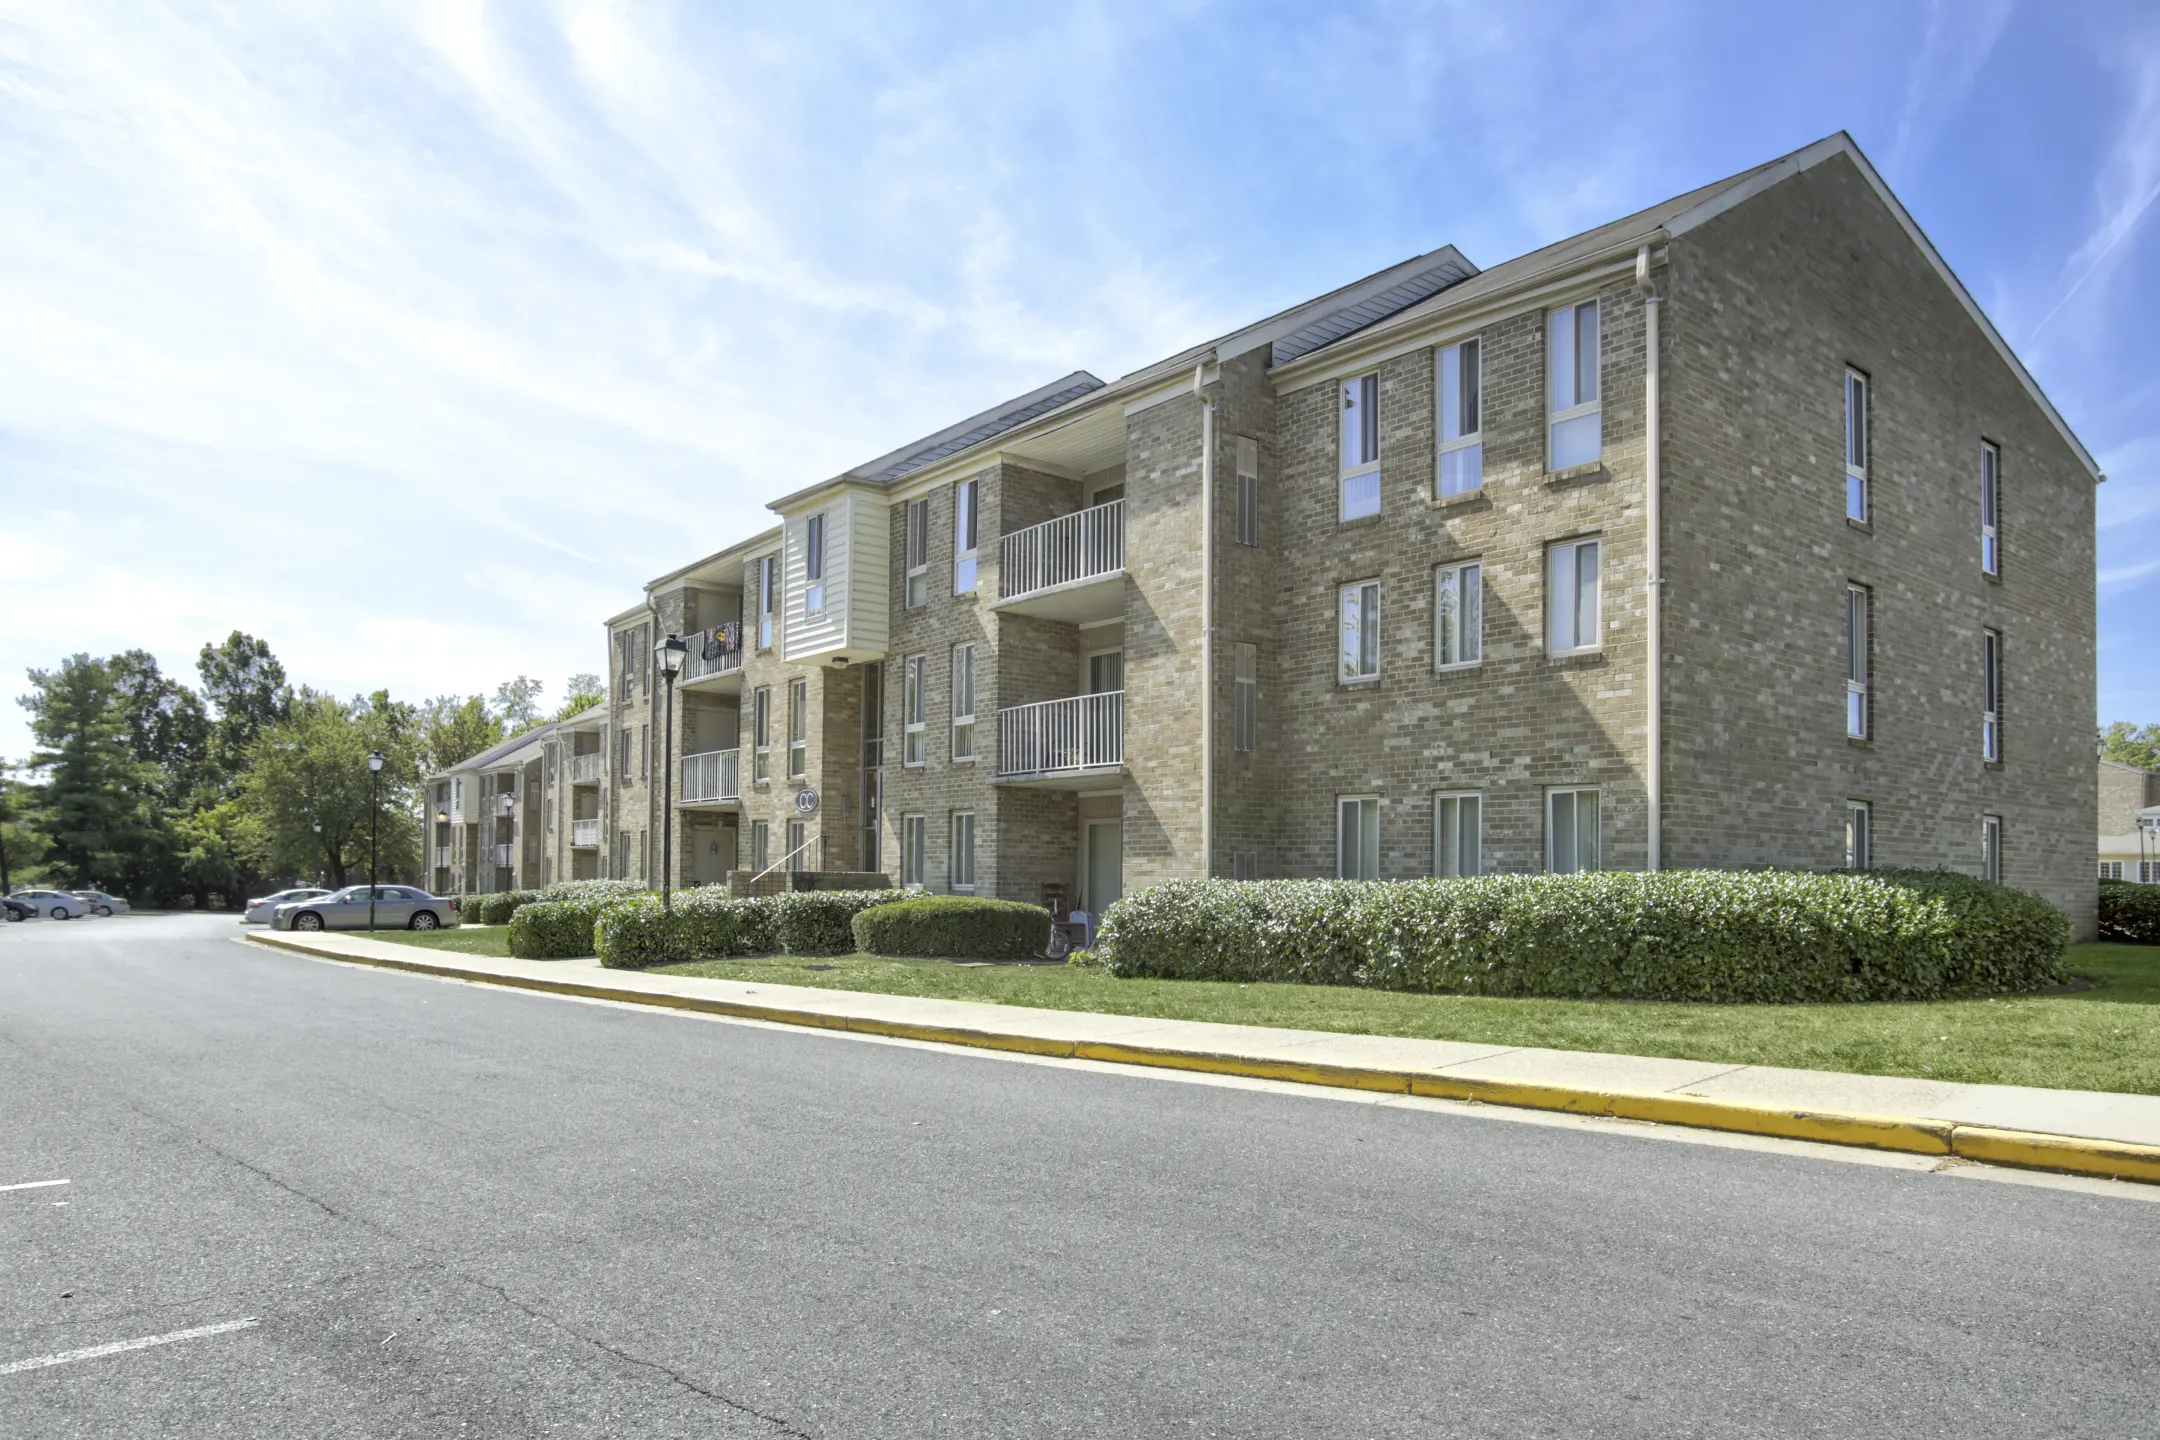 Building - The Apartments at Elmwood Terrace/Hunters Glen - Frederick, MD